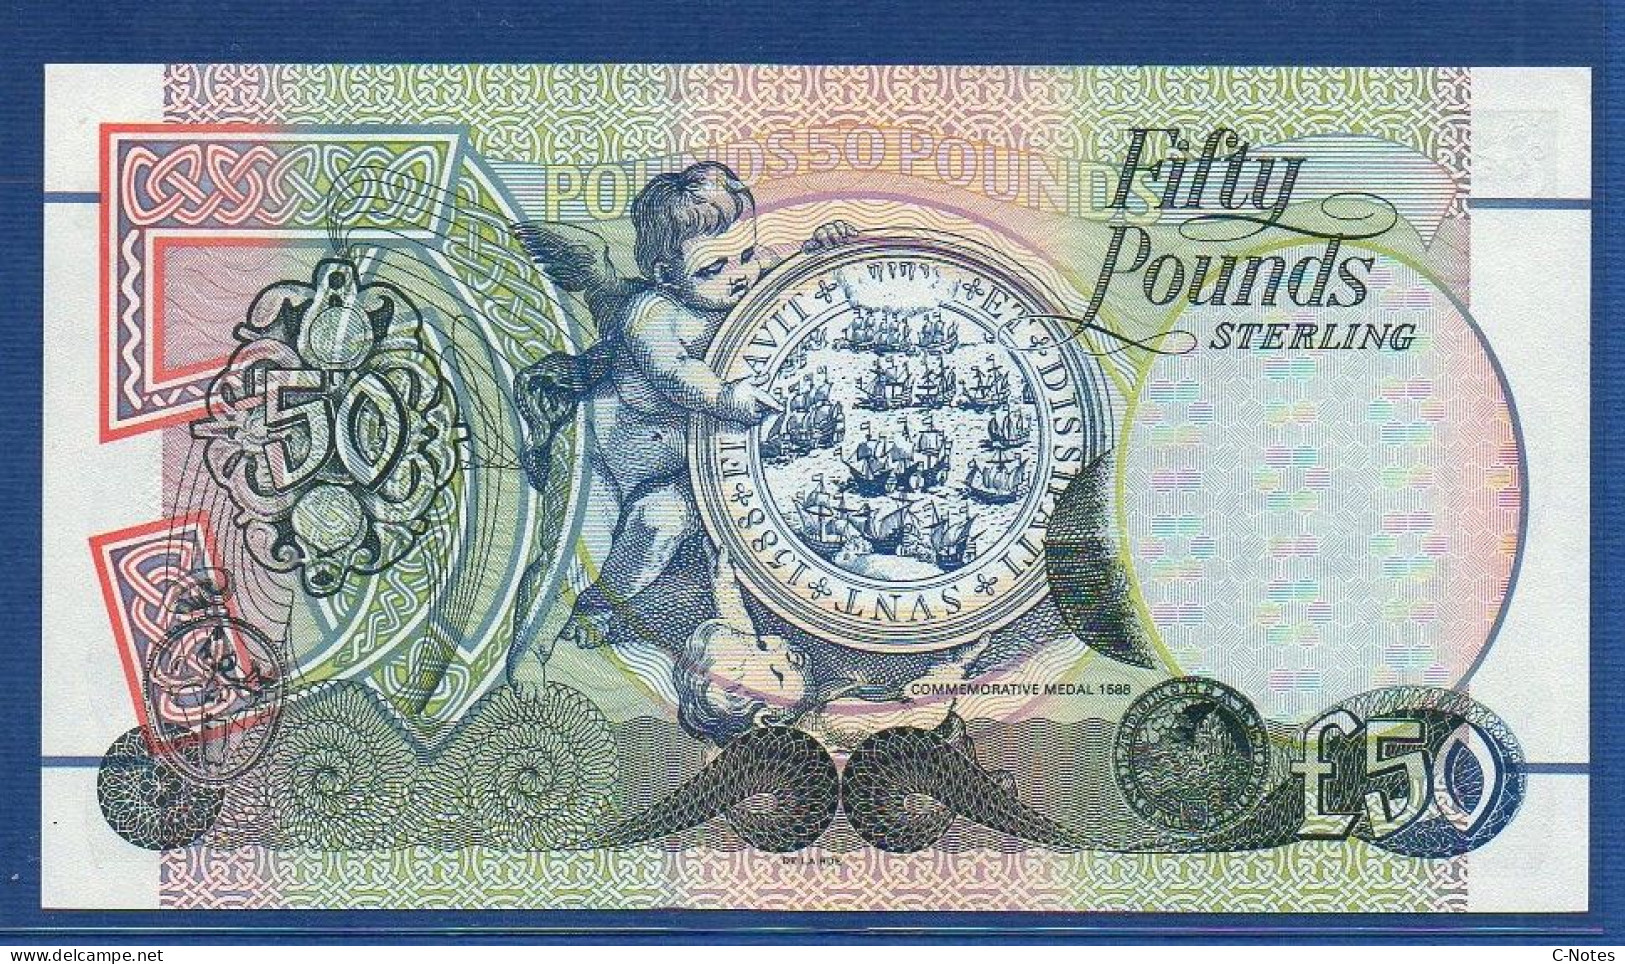 NORTHERN IRELAND - P.138b – 50 POUNDS 2009 UNC, S/n CA023164 First Trust Bank - 50 Pounds